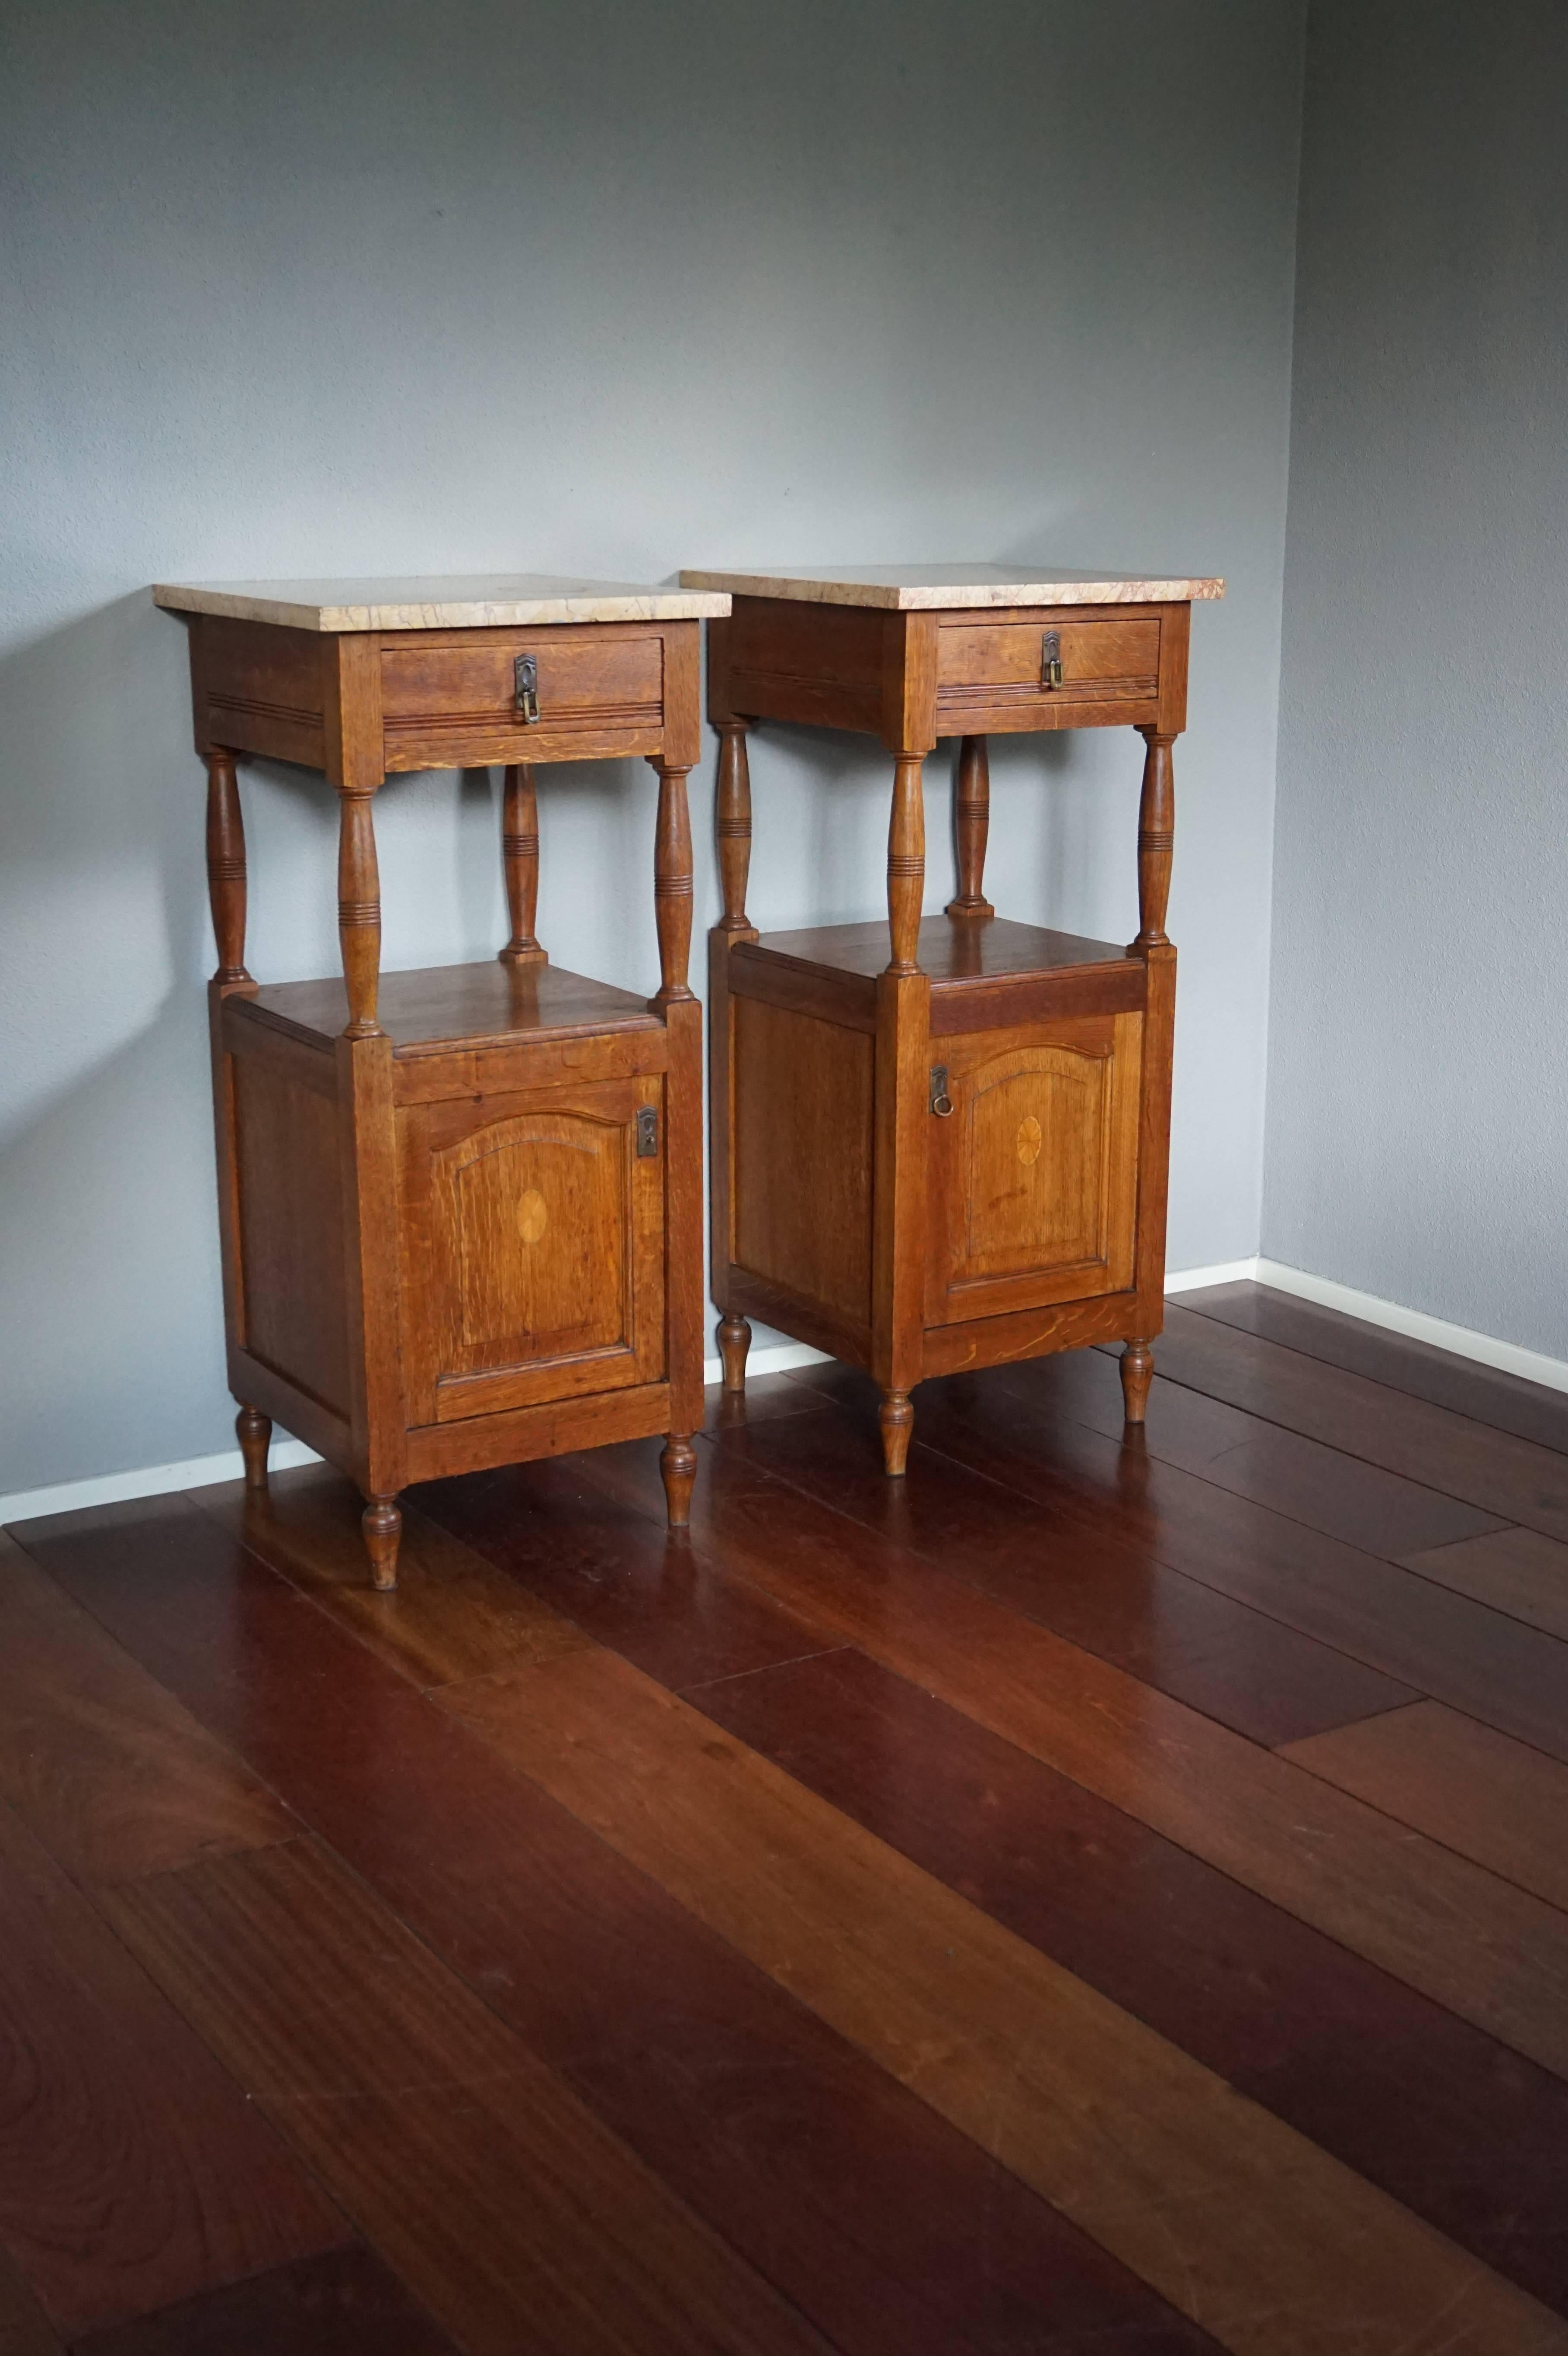 Beautiful antique nightstands with inlaid oval rosettes and more.

These tall and hand-crafted antique nightstands were made to stand on either side of a bed, but we have also sold nightstands to galleries who use them to display vases, bronze